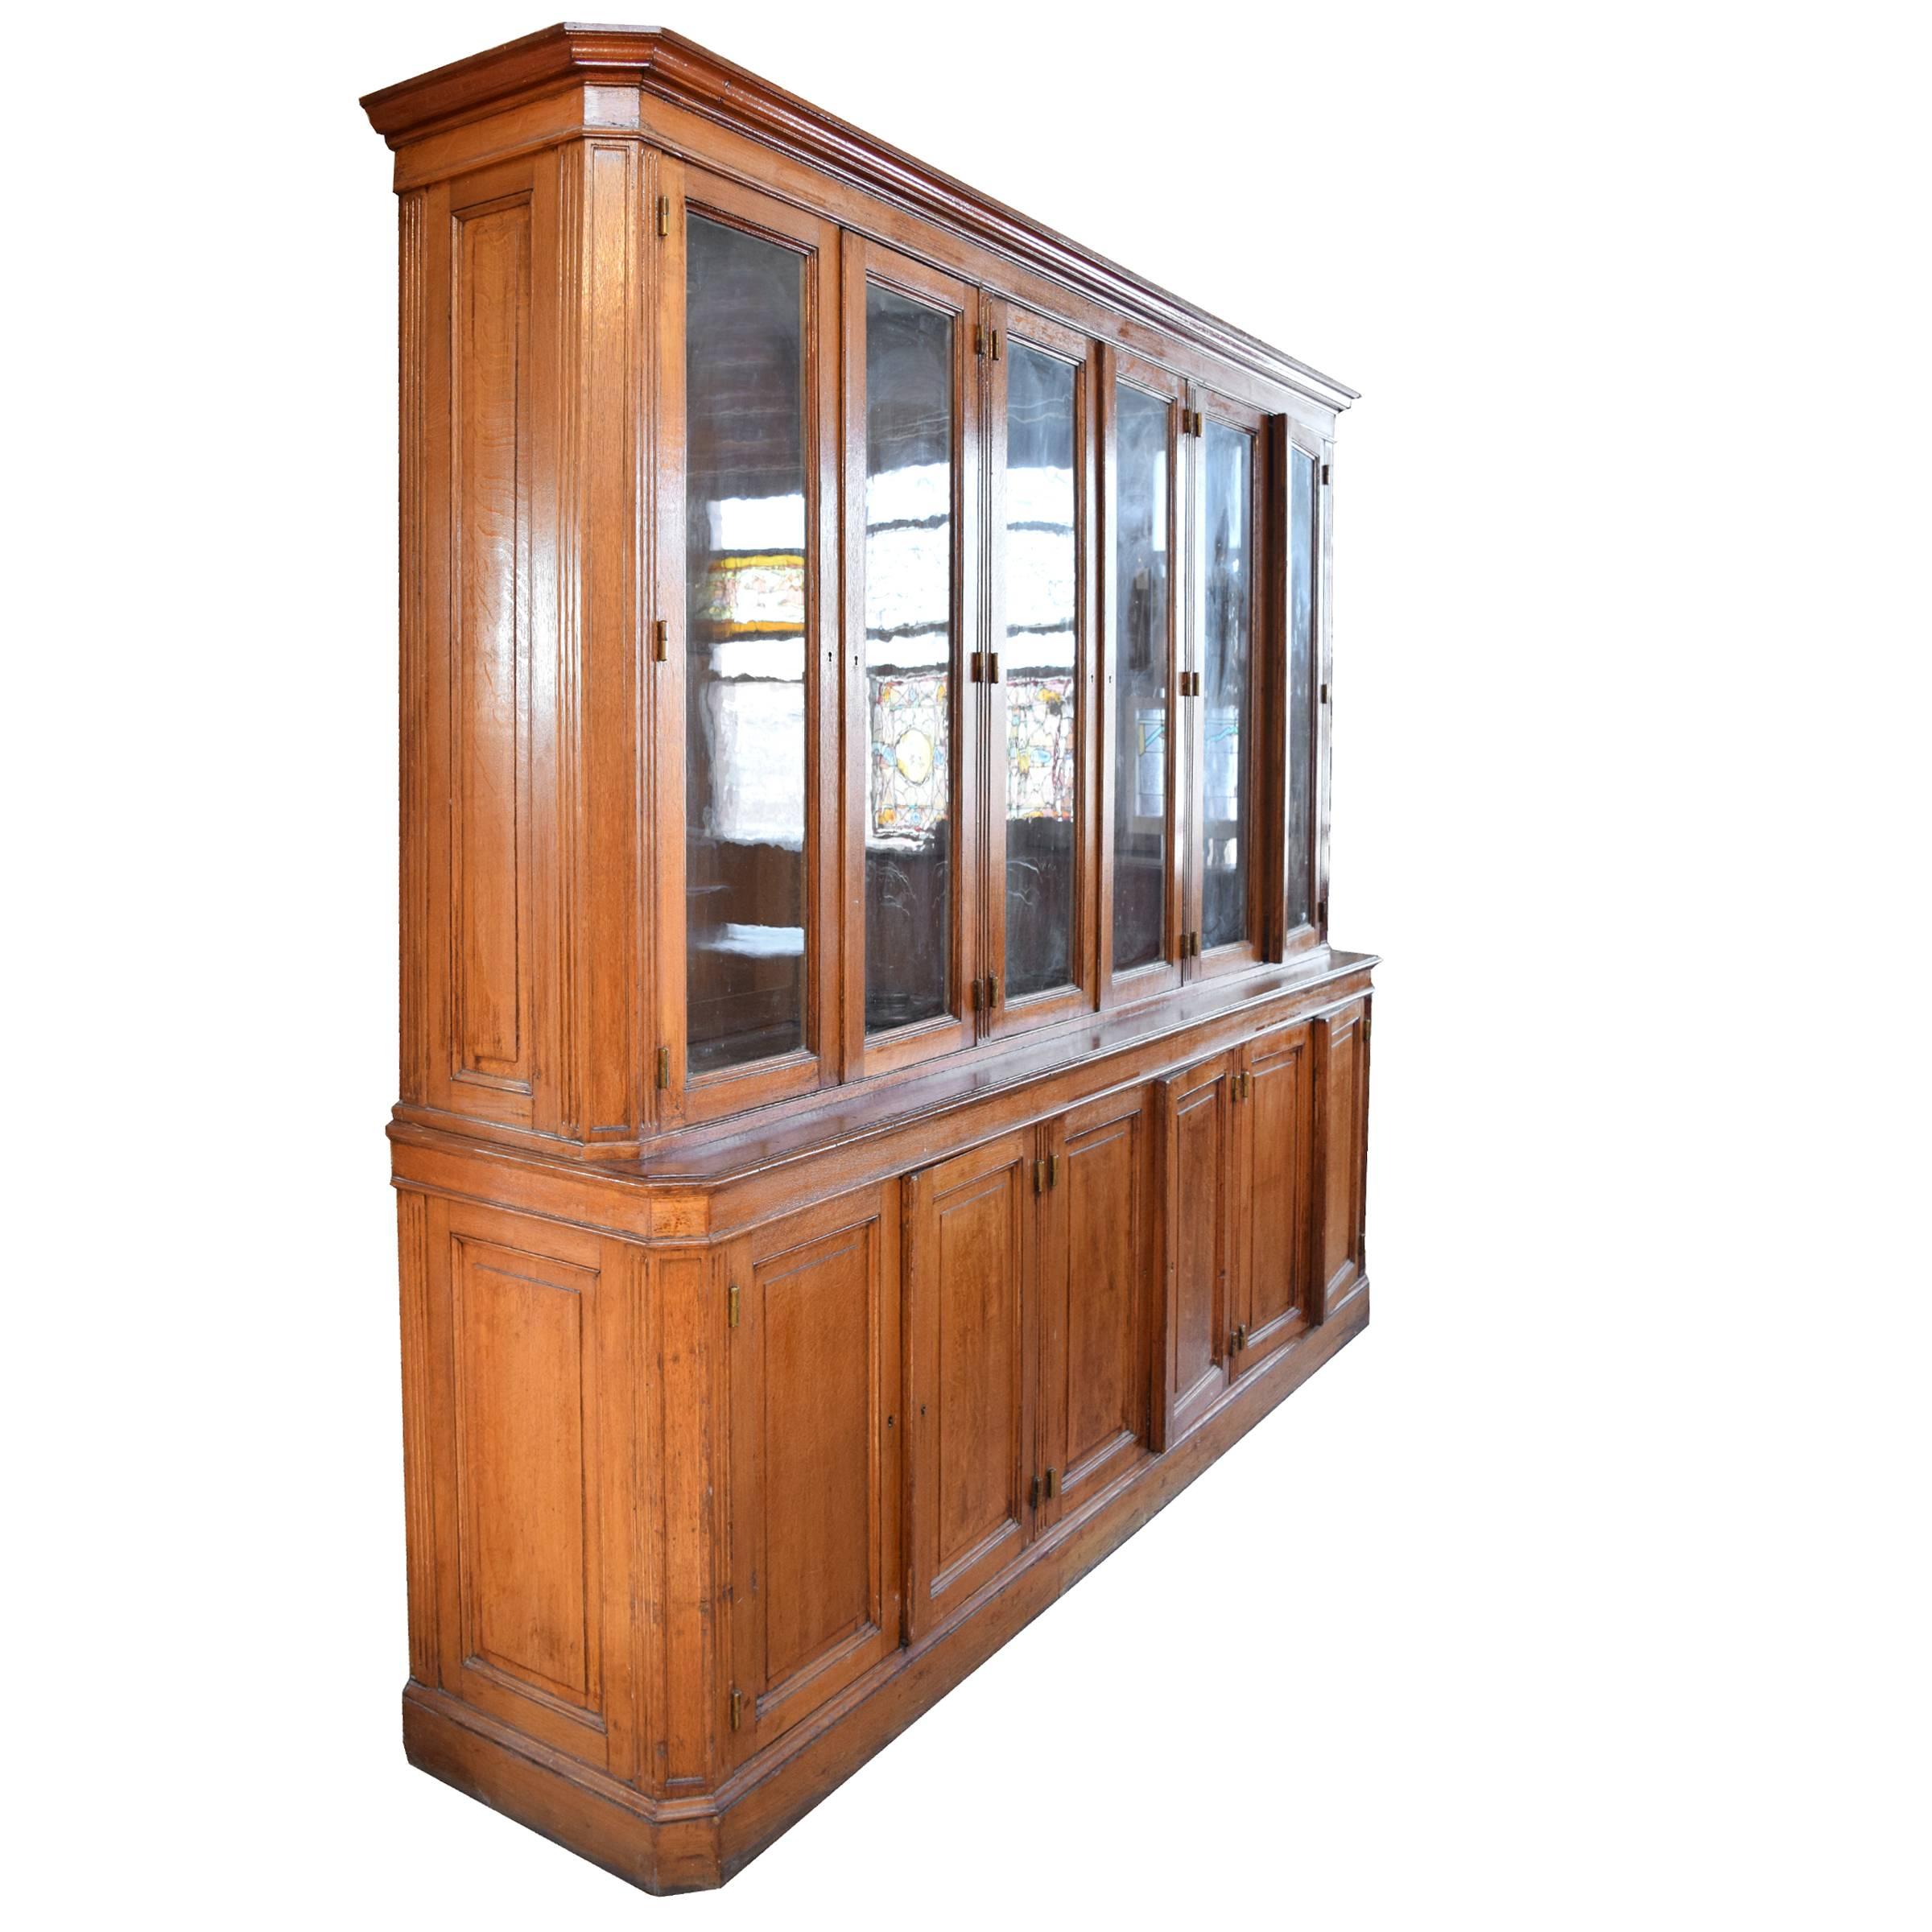 A fantastic French wood display cabinet with six glass doors on top and six wood doors on the bottom, and great hardware, circa 1900.